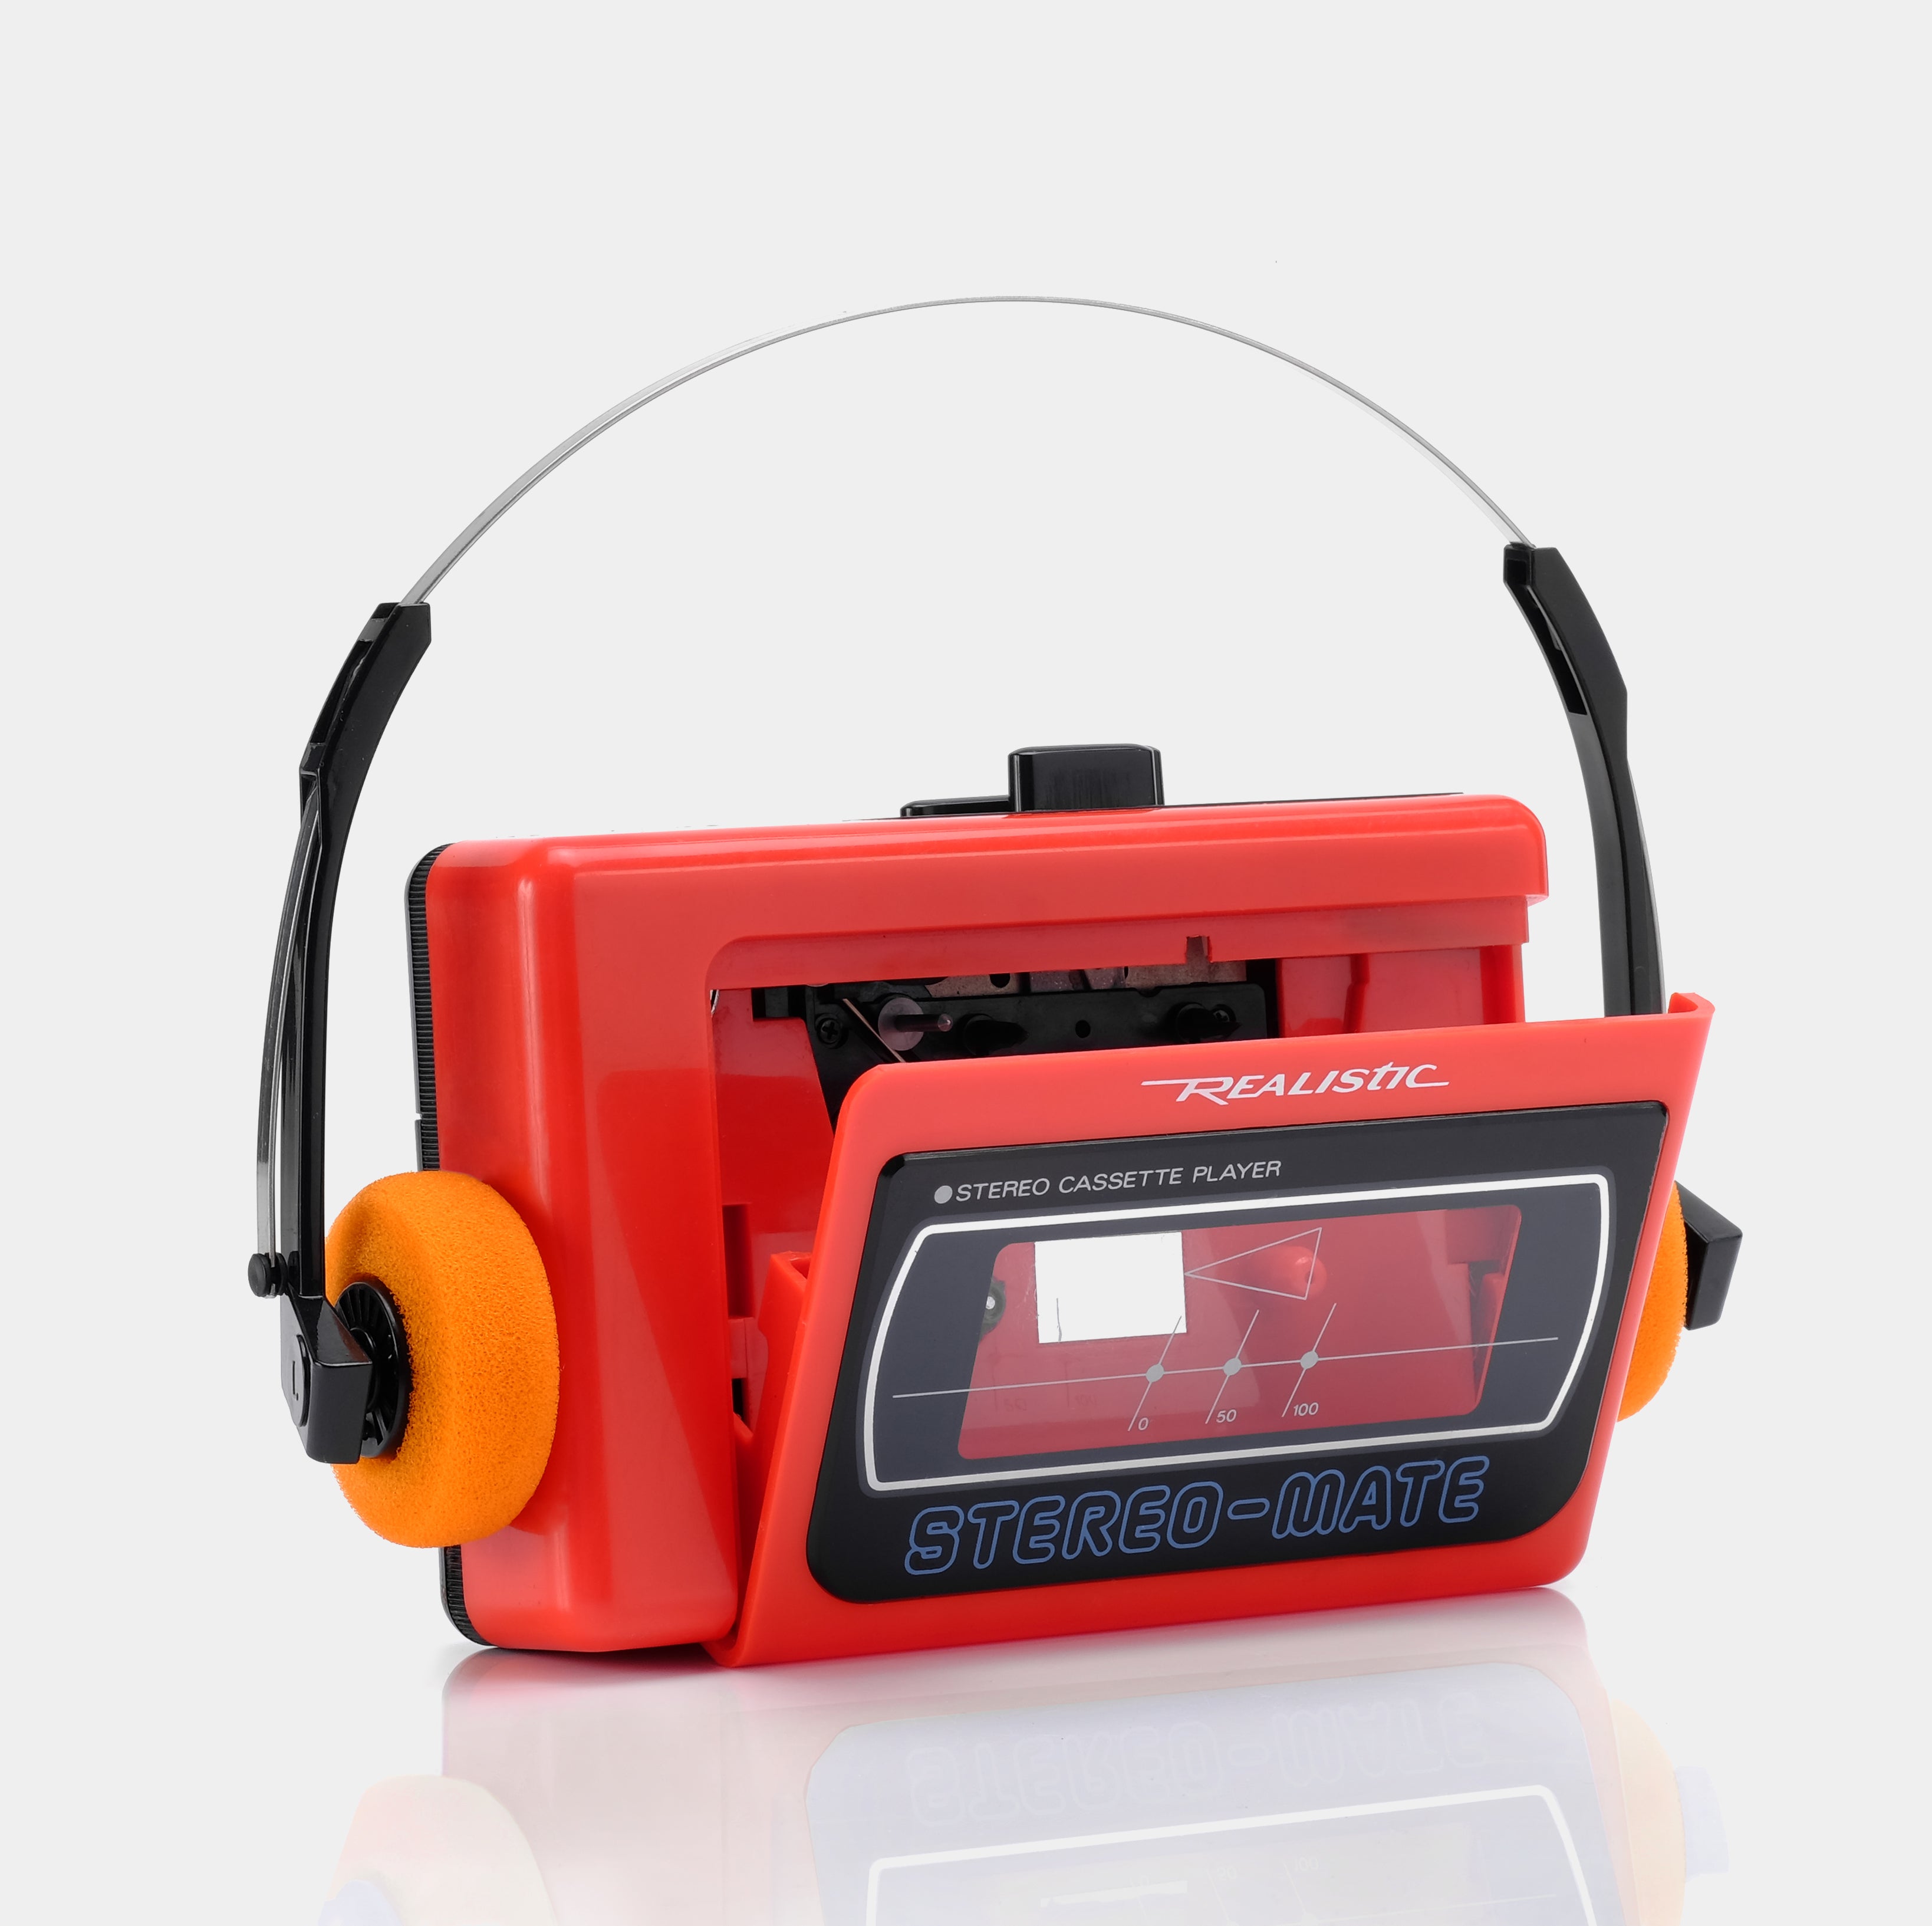 Realistic SCP-28 Stereo-Mate Portable Cassette Player